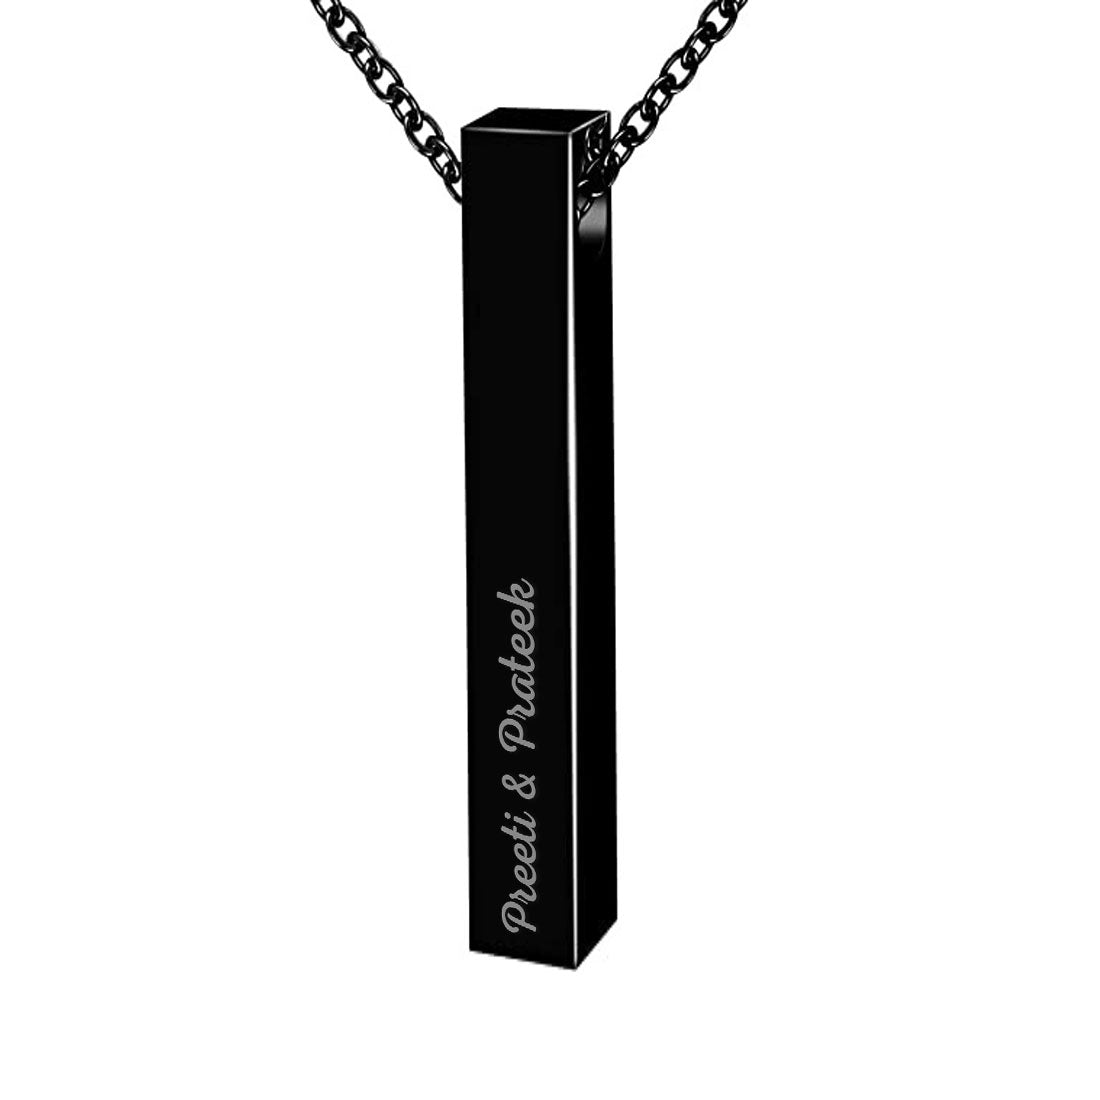 Custom Chain Pendant With Name Engraved Gifts for Birthday Anniversary Valentine Day - Add Name